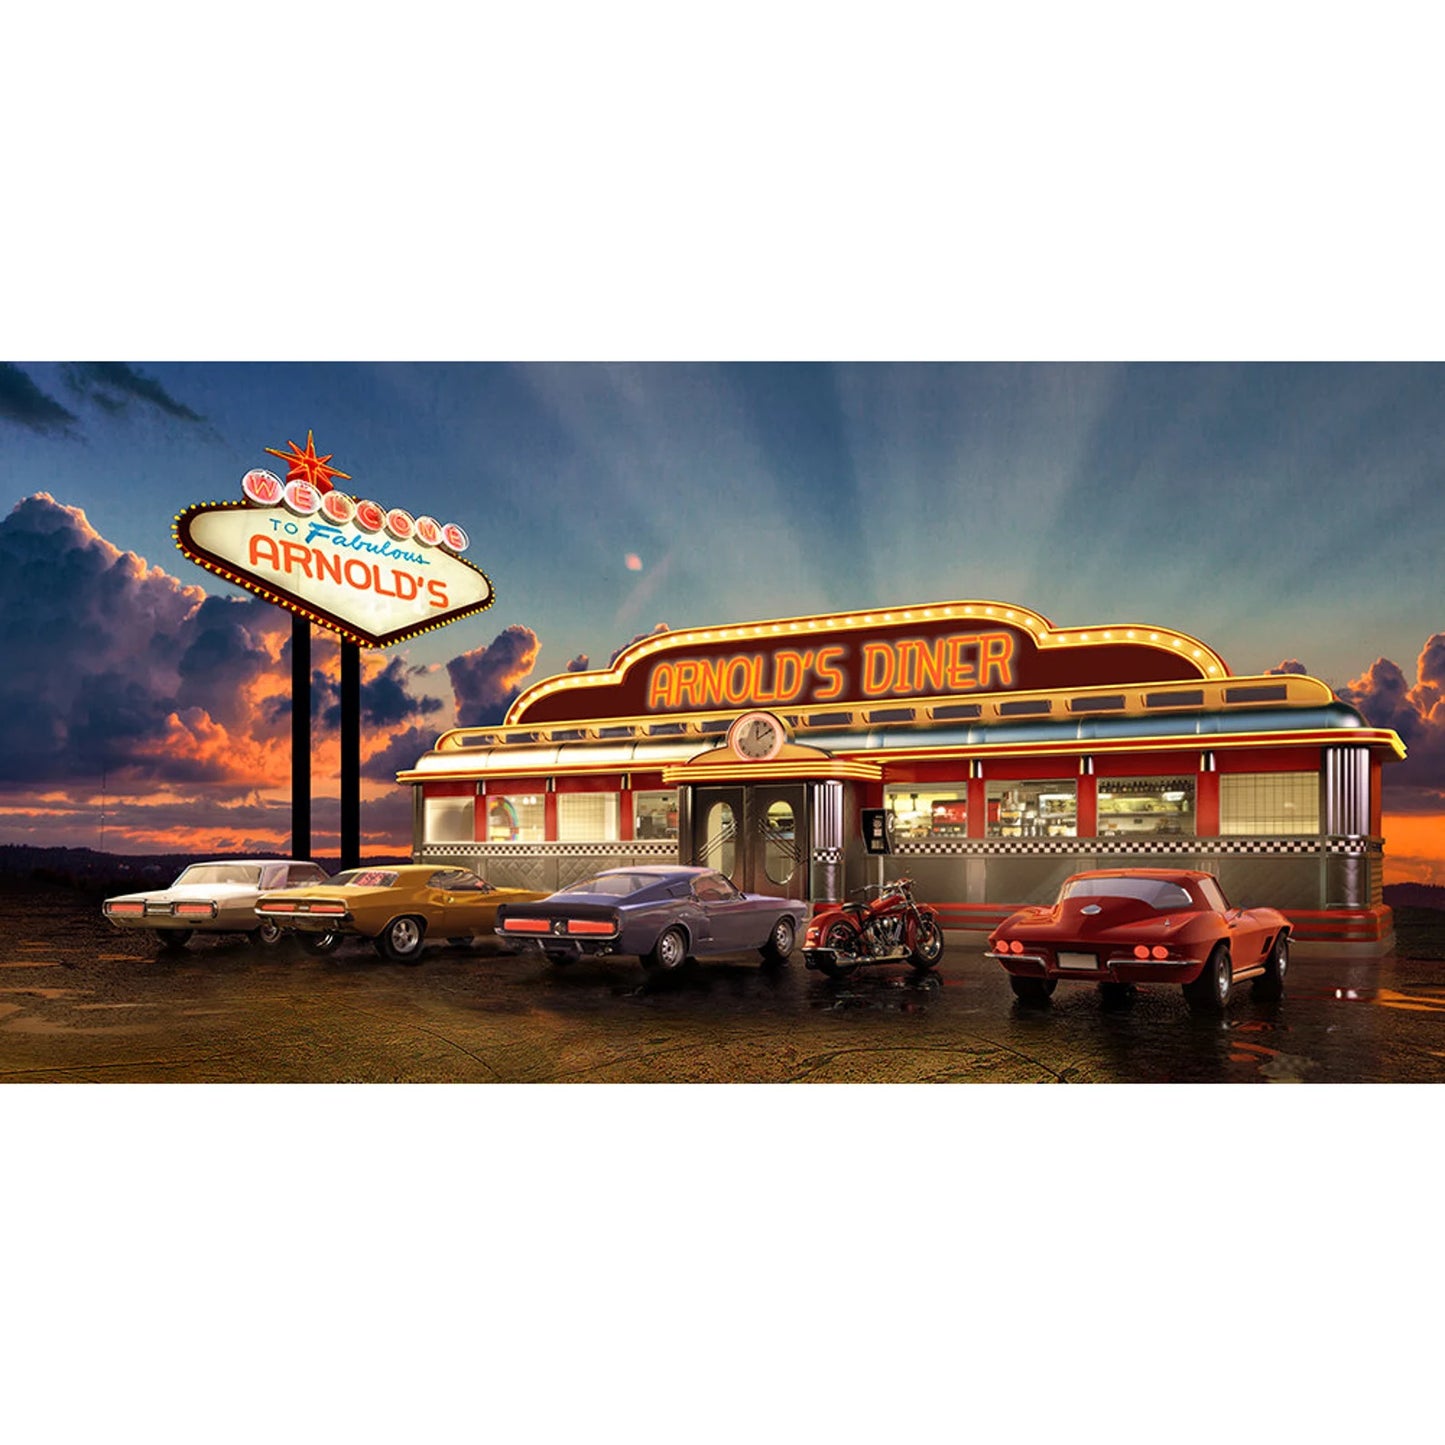 Red 57 Chevy Diner Photo Backdrop - Pro 20  x 10  